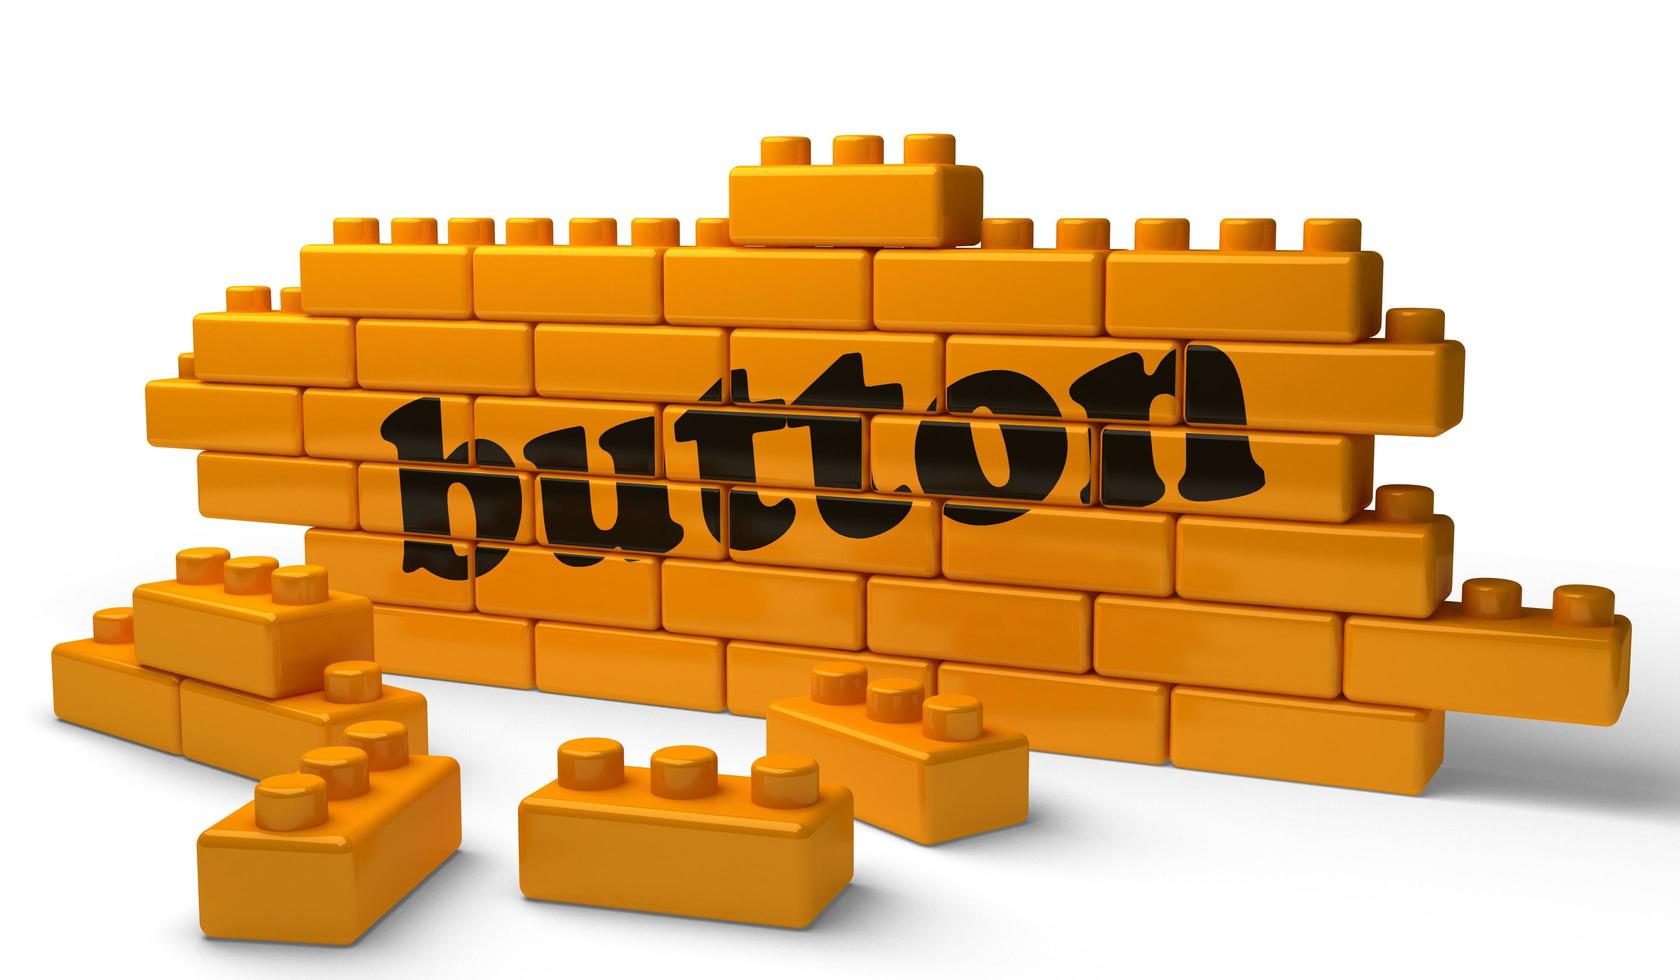 button word on yellow brick wall photo